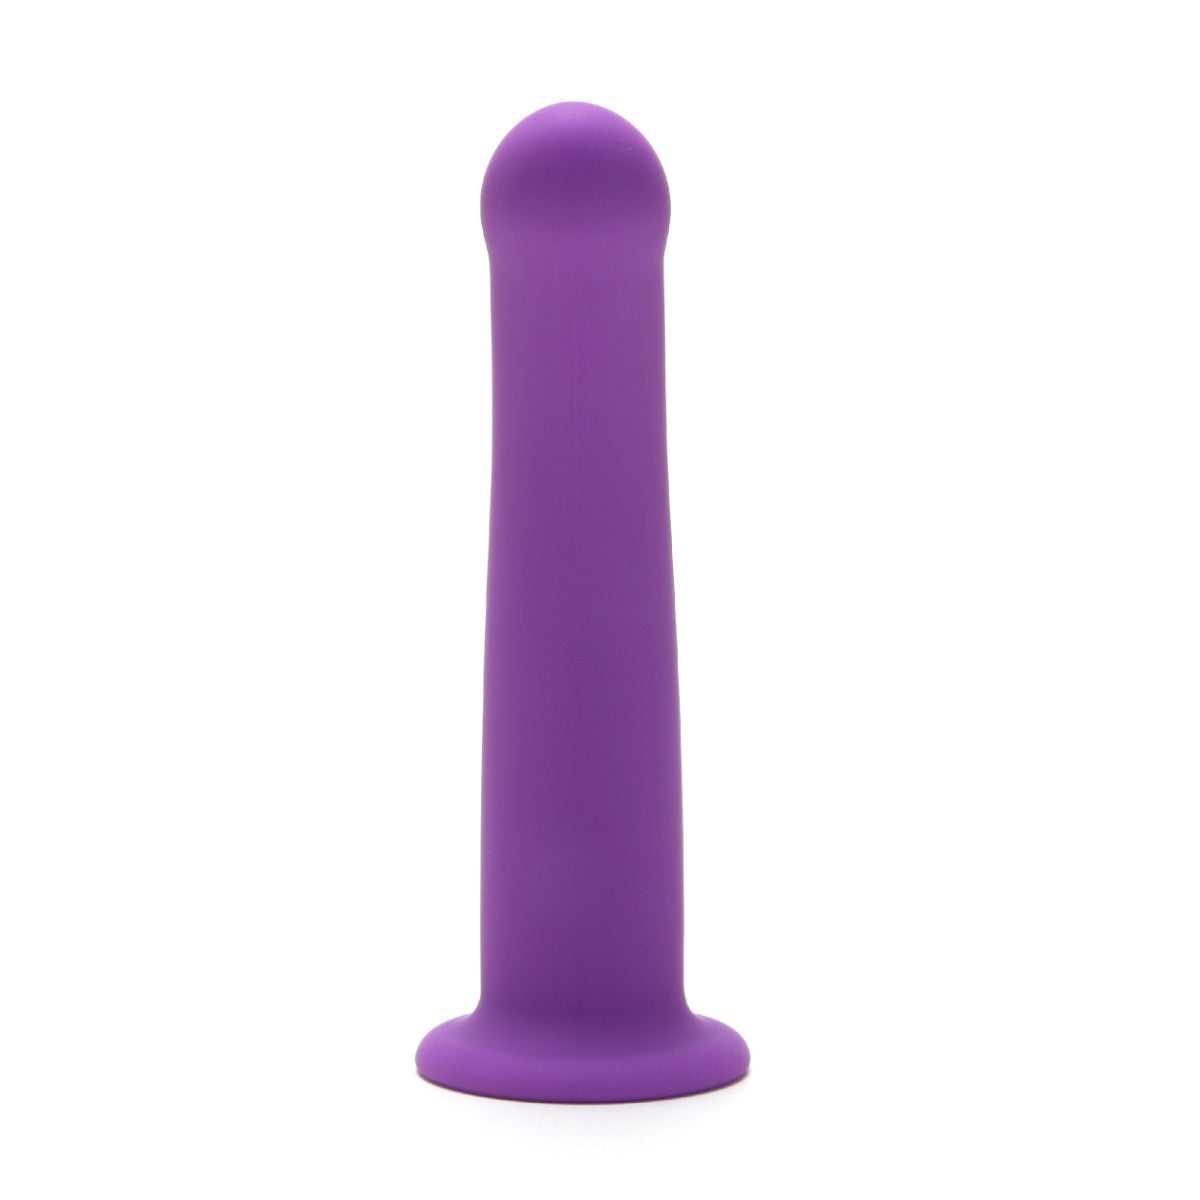 a purple plastic object on a white background